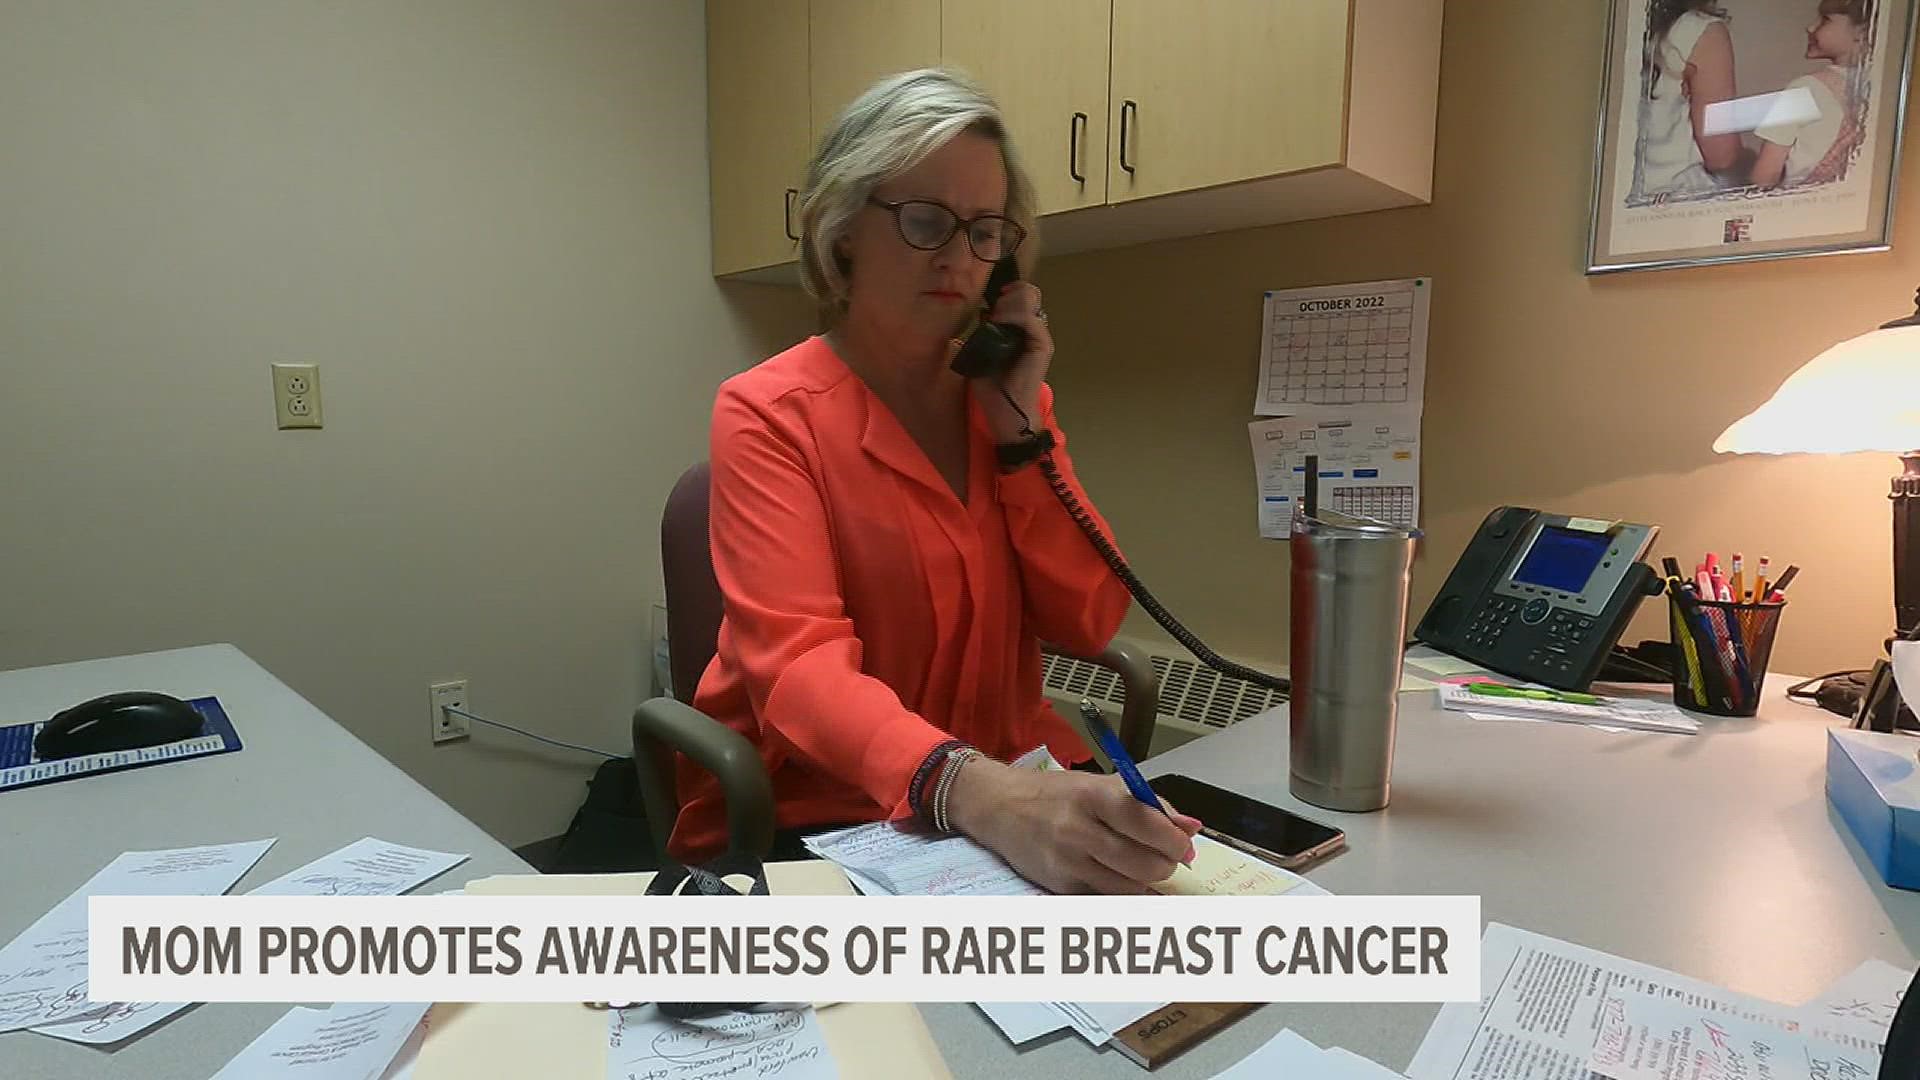 After battling Inflammatory Breast Cancer, Diane Koster's daughter, Lindsay, died in February 2017. Now, Diane is working to spread breast cancer awareness in the QC